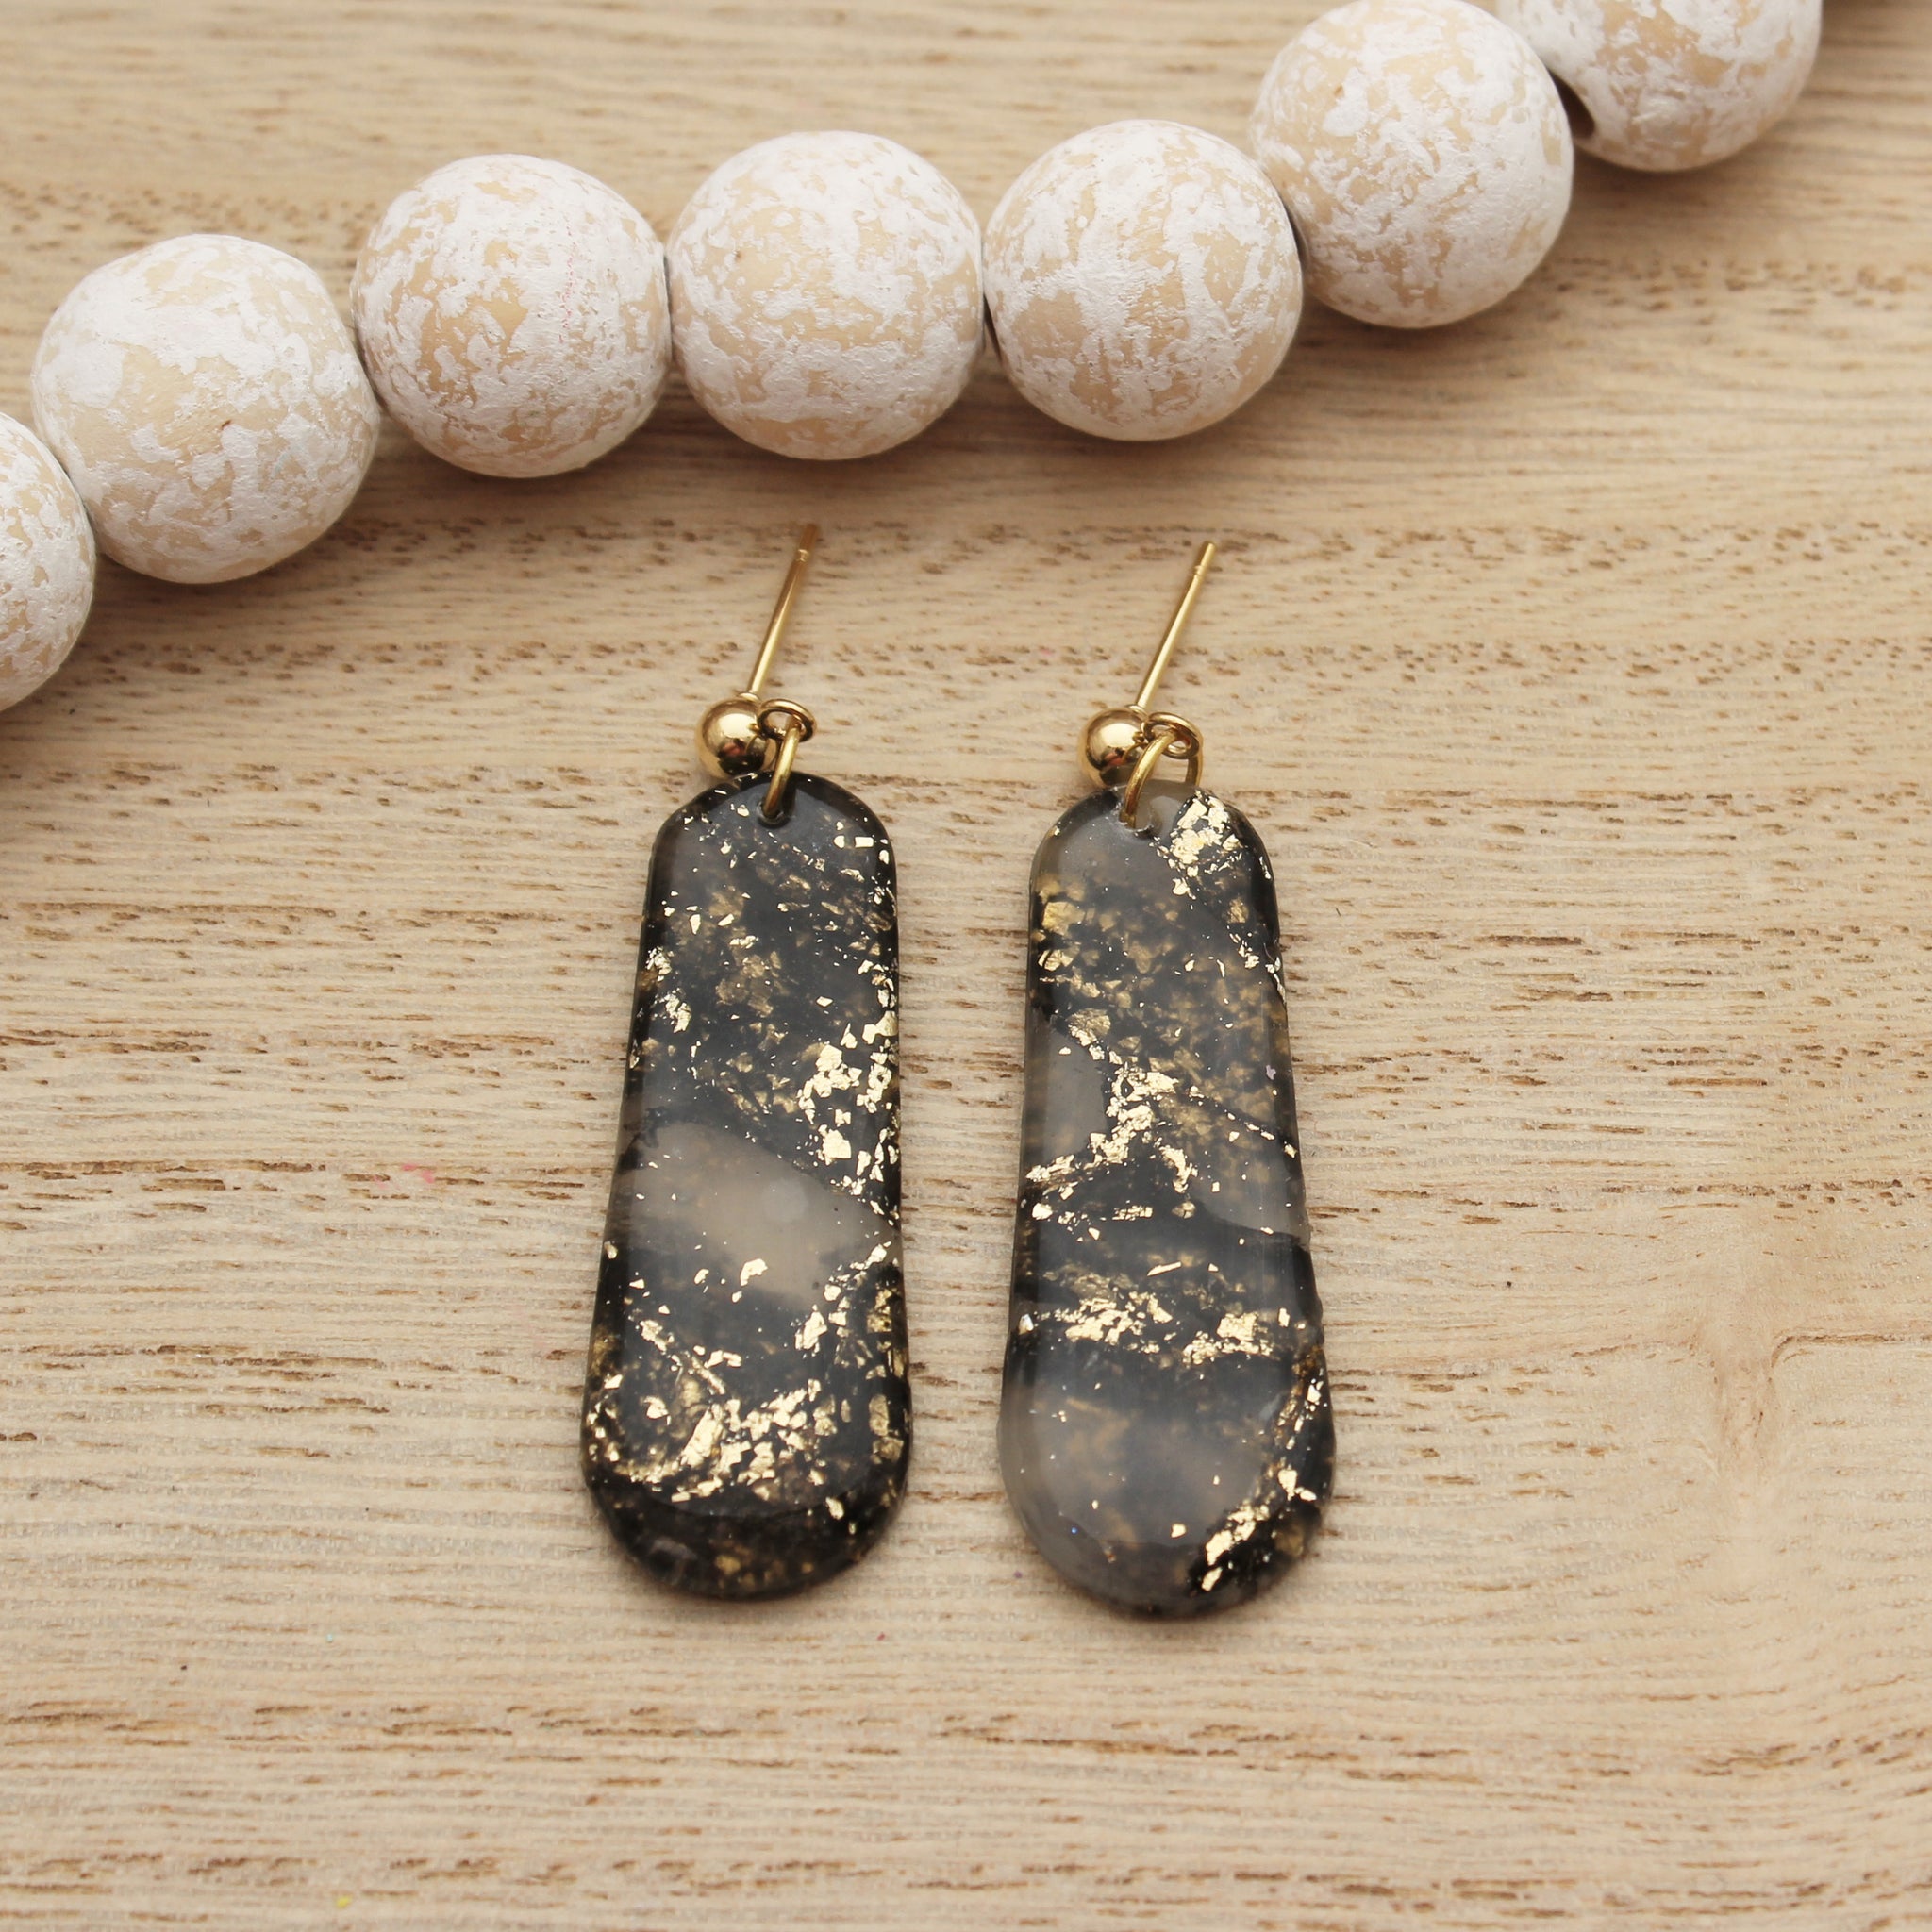 Black and Gold Translucent Elongated Oval Dangle Earrings